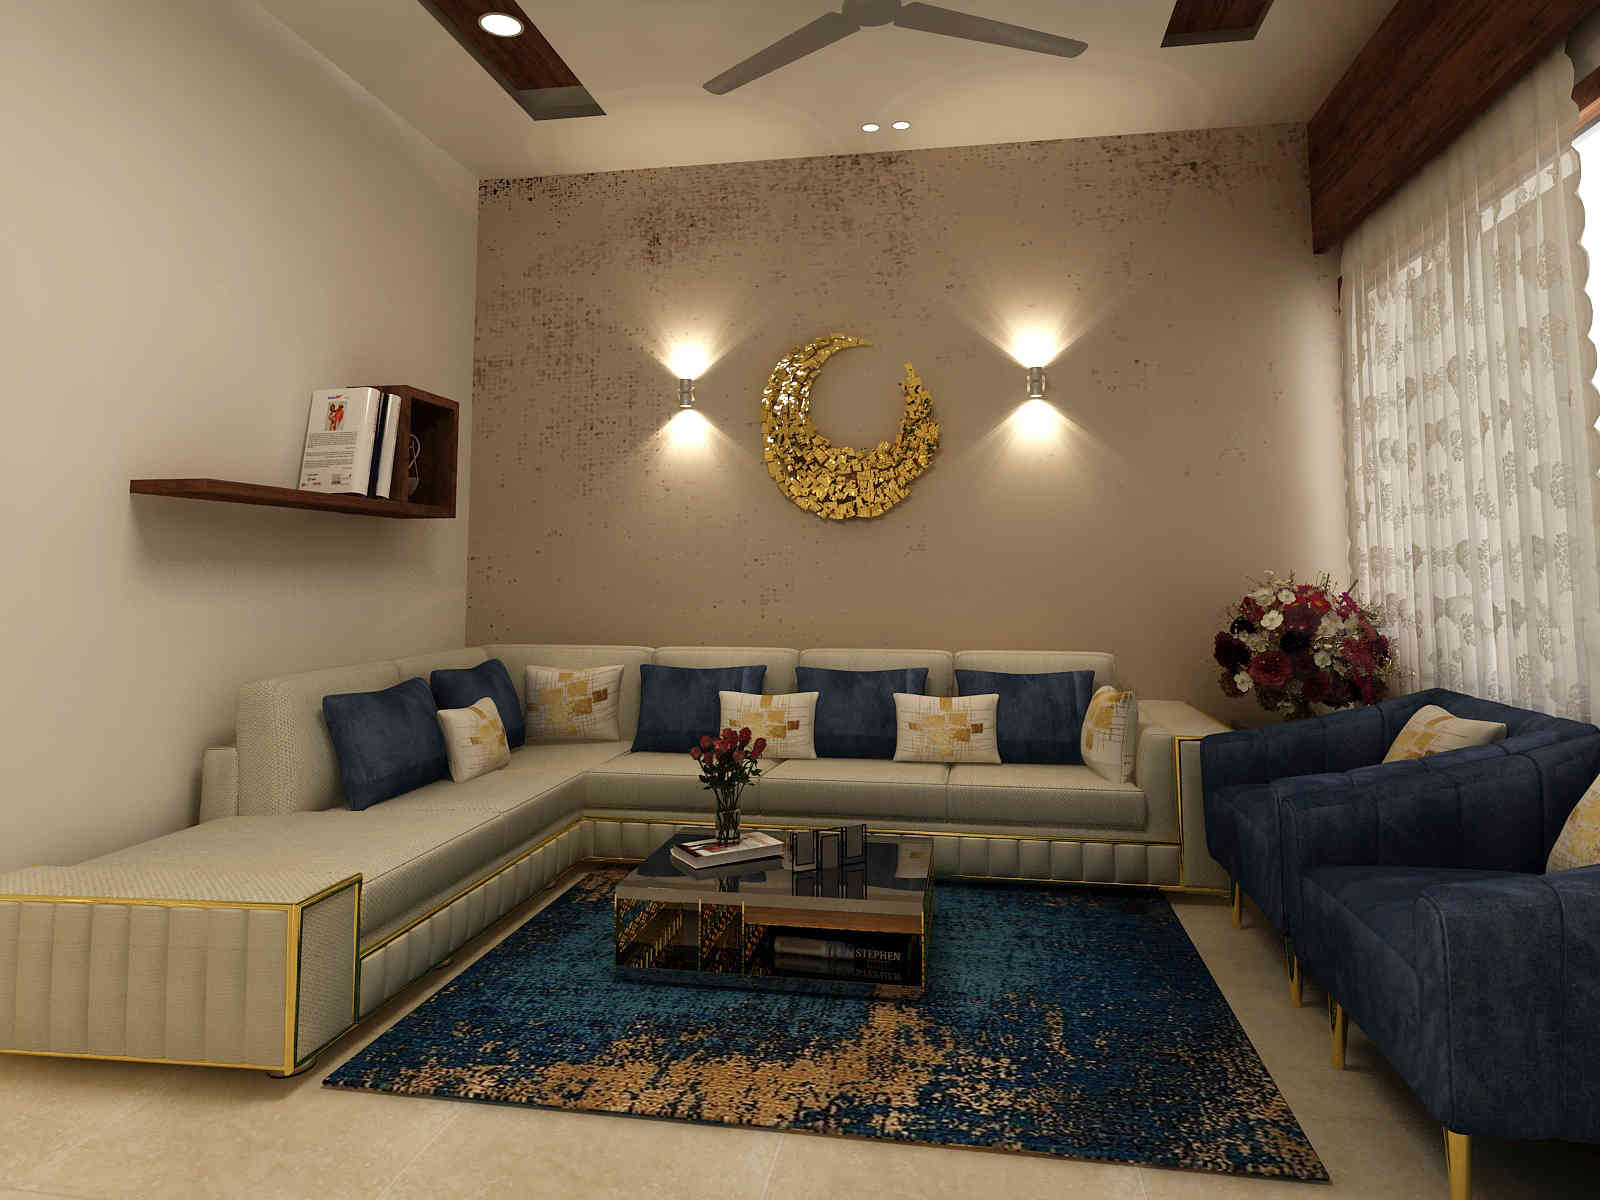 Contemporary Living Room Design With Wall Lights